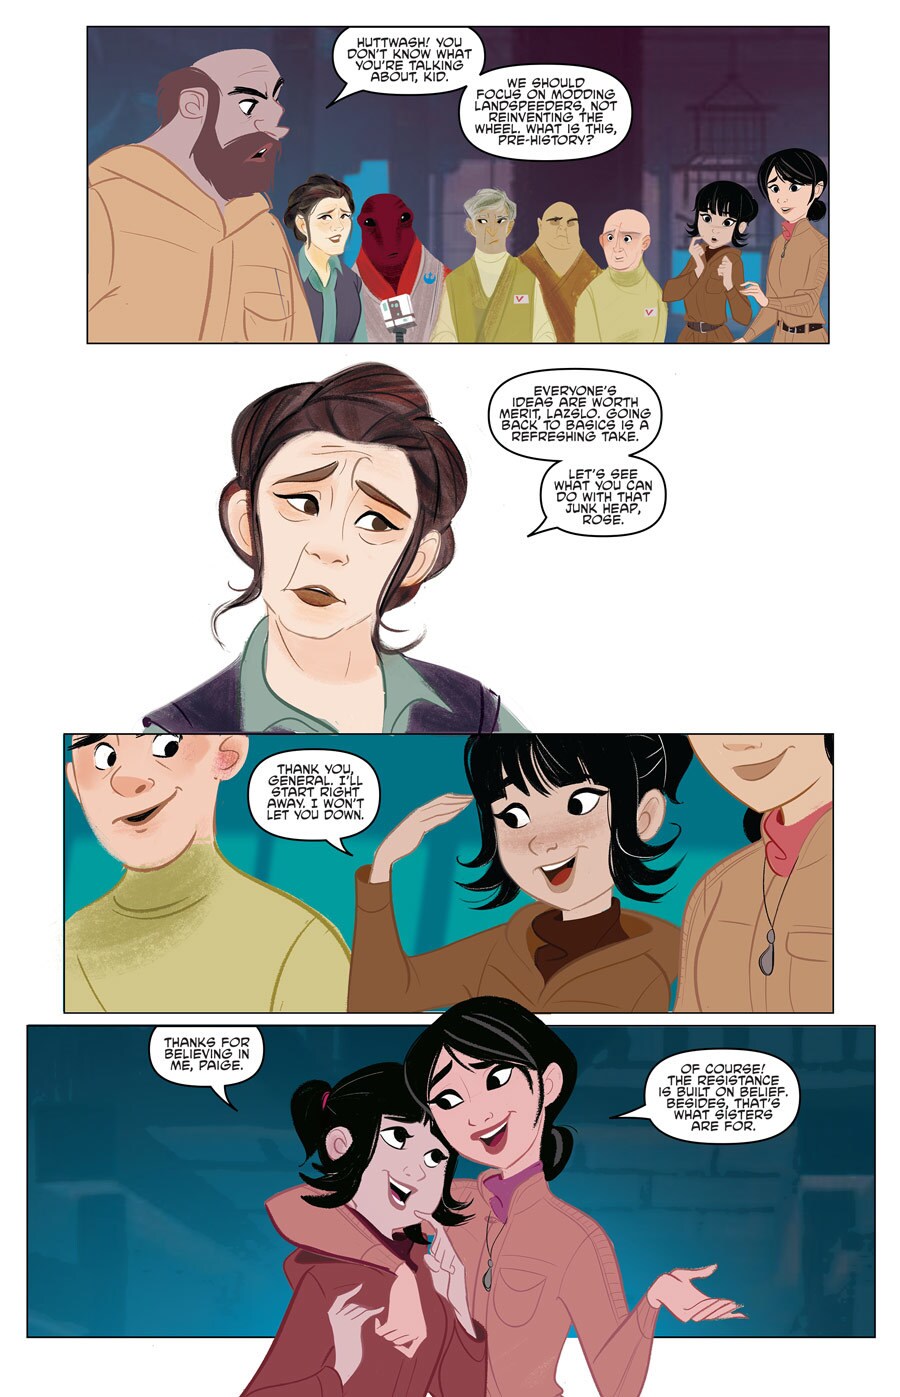 In panels from the comic book Star Wars Forces of Destiny: Rose & Paige, General Organa affirms Rose's proposed solution after a fellow Resistance member dismisses it.